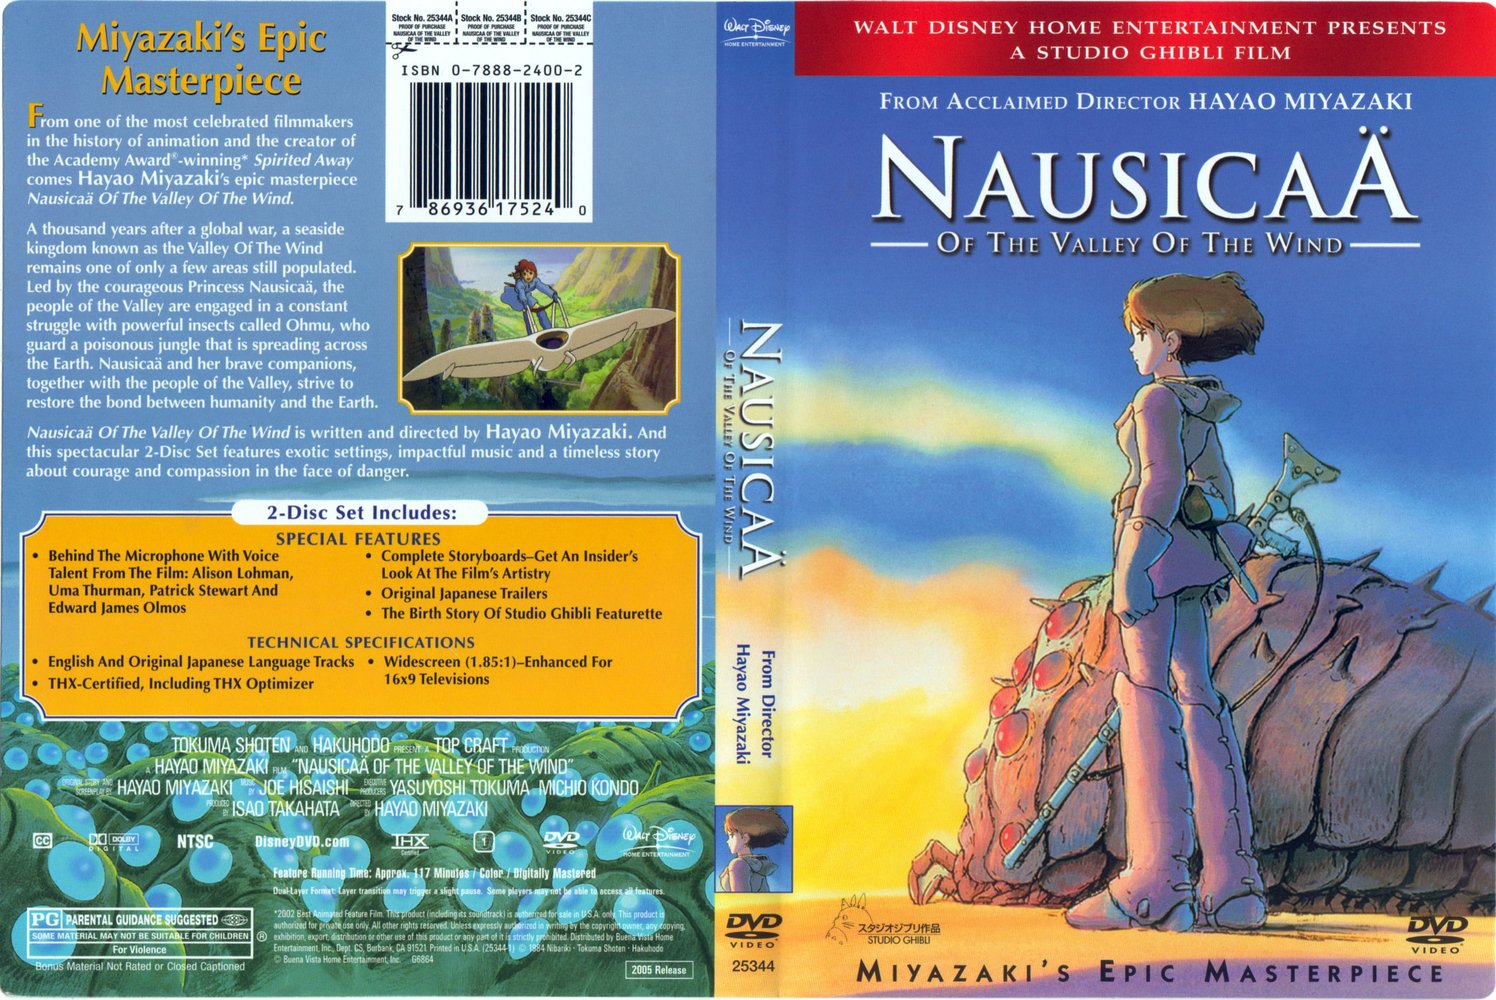 Nausica?? of the Valley of the Wind (1984) - front.